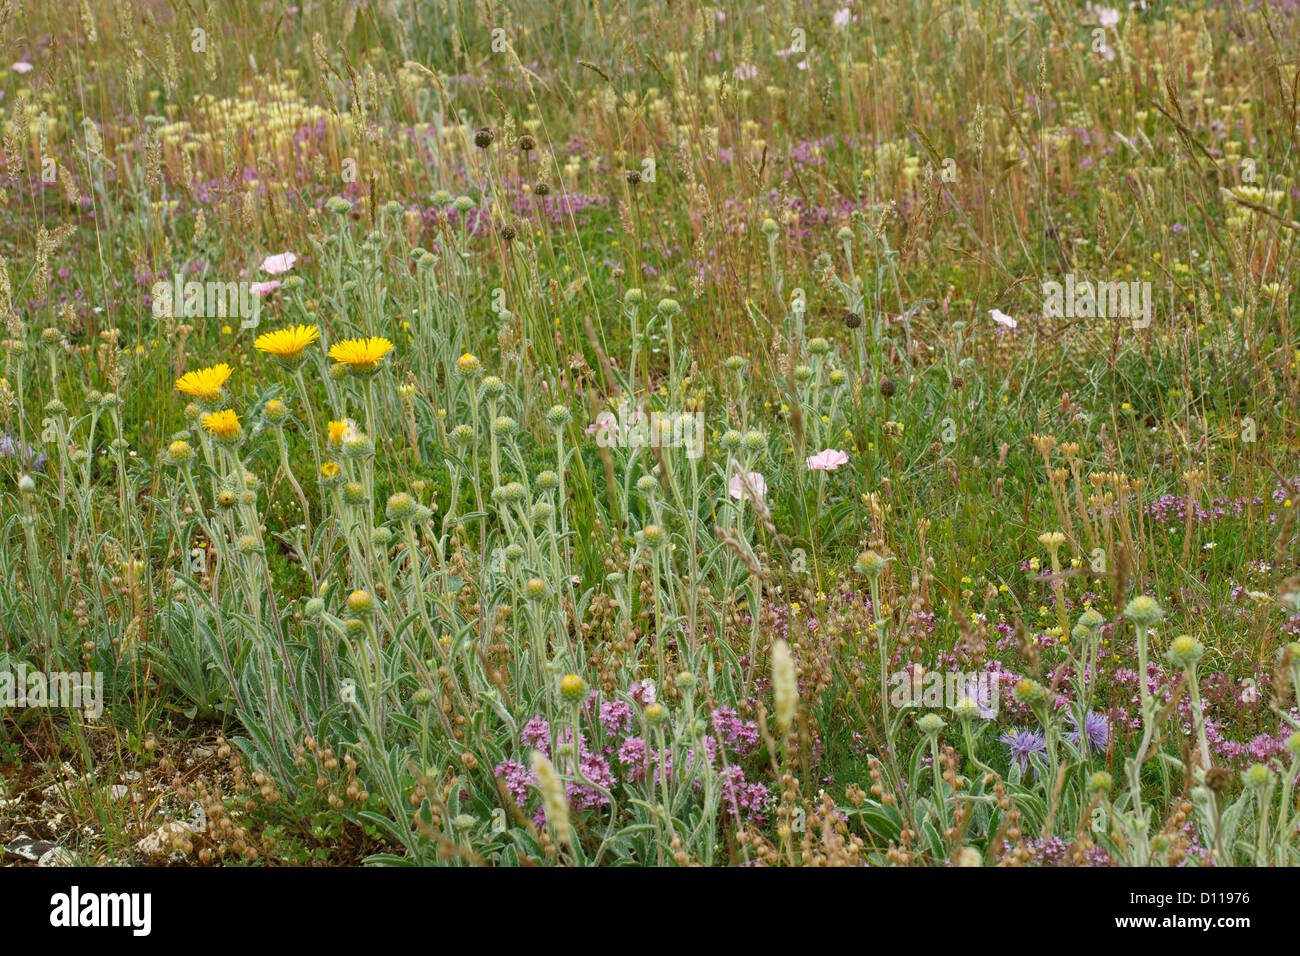 Wildflowers including Inula sp. and Thymus sp. on the Causse de Gramat, Lot region, France. June. Stock Photo